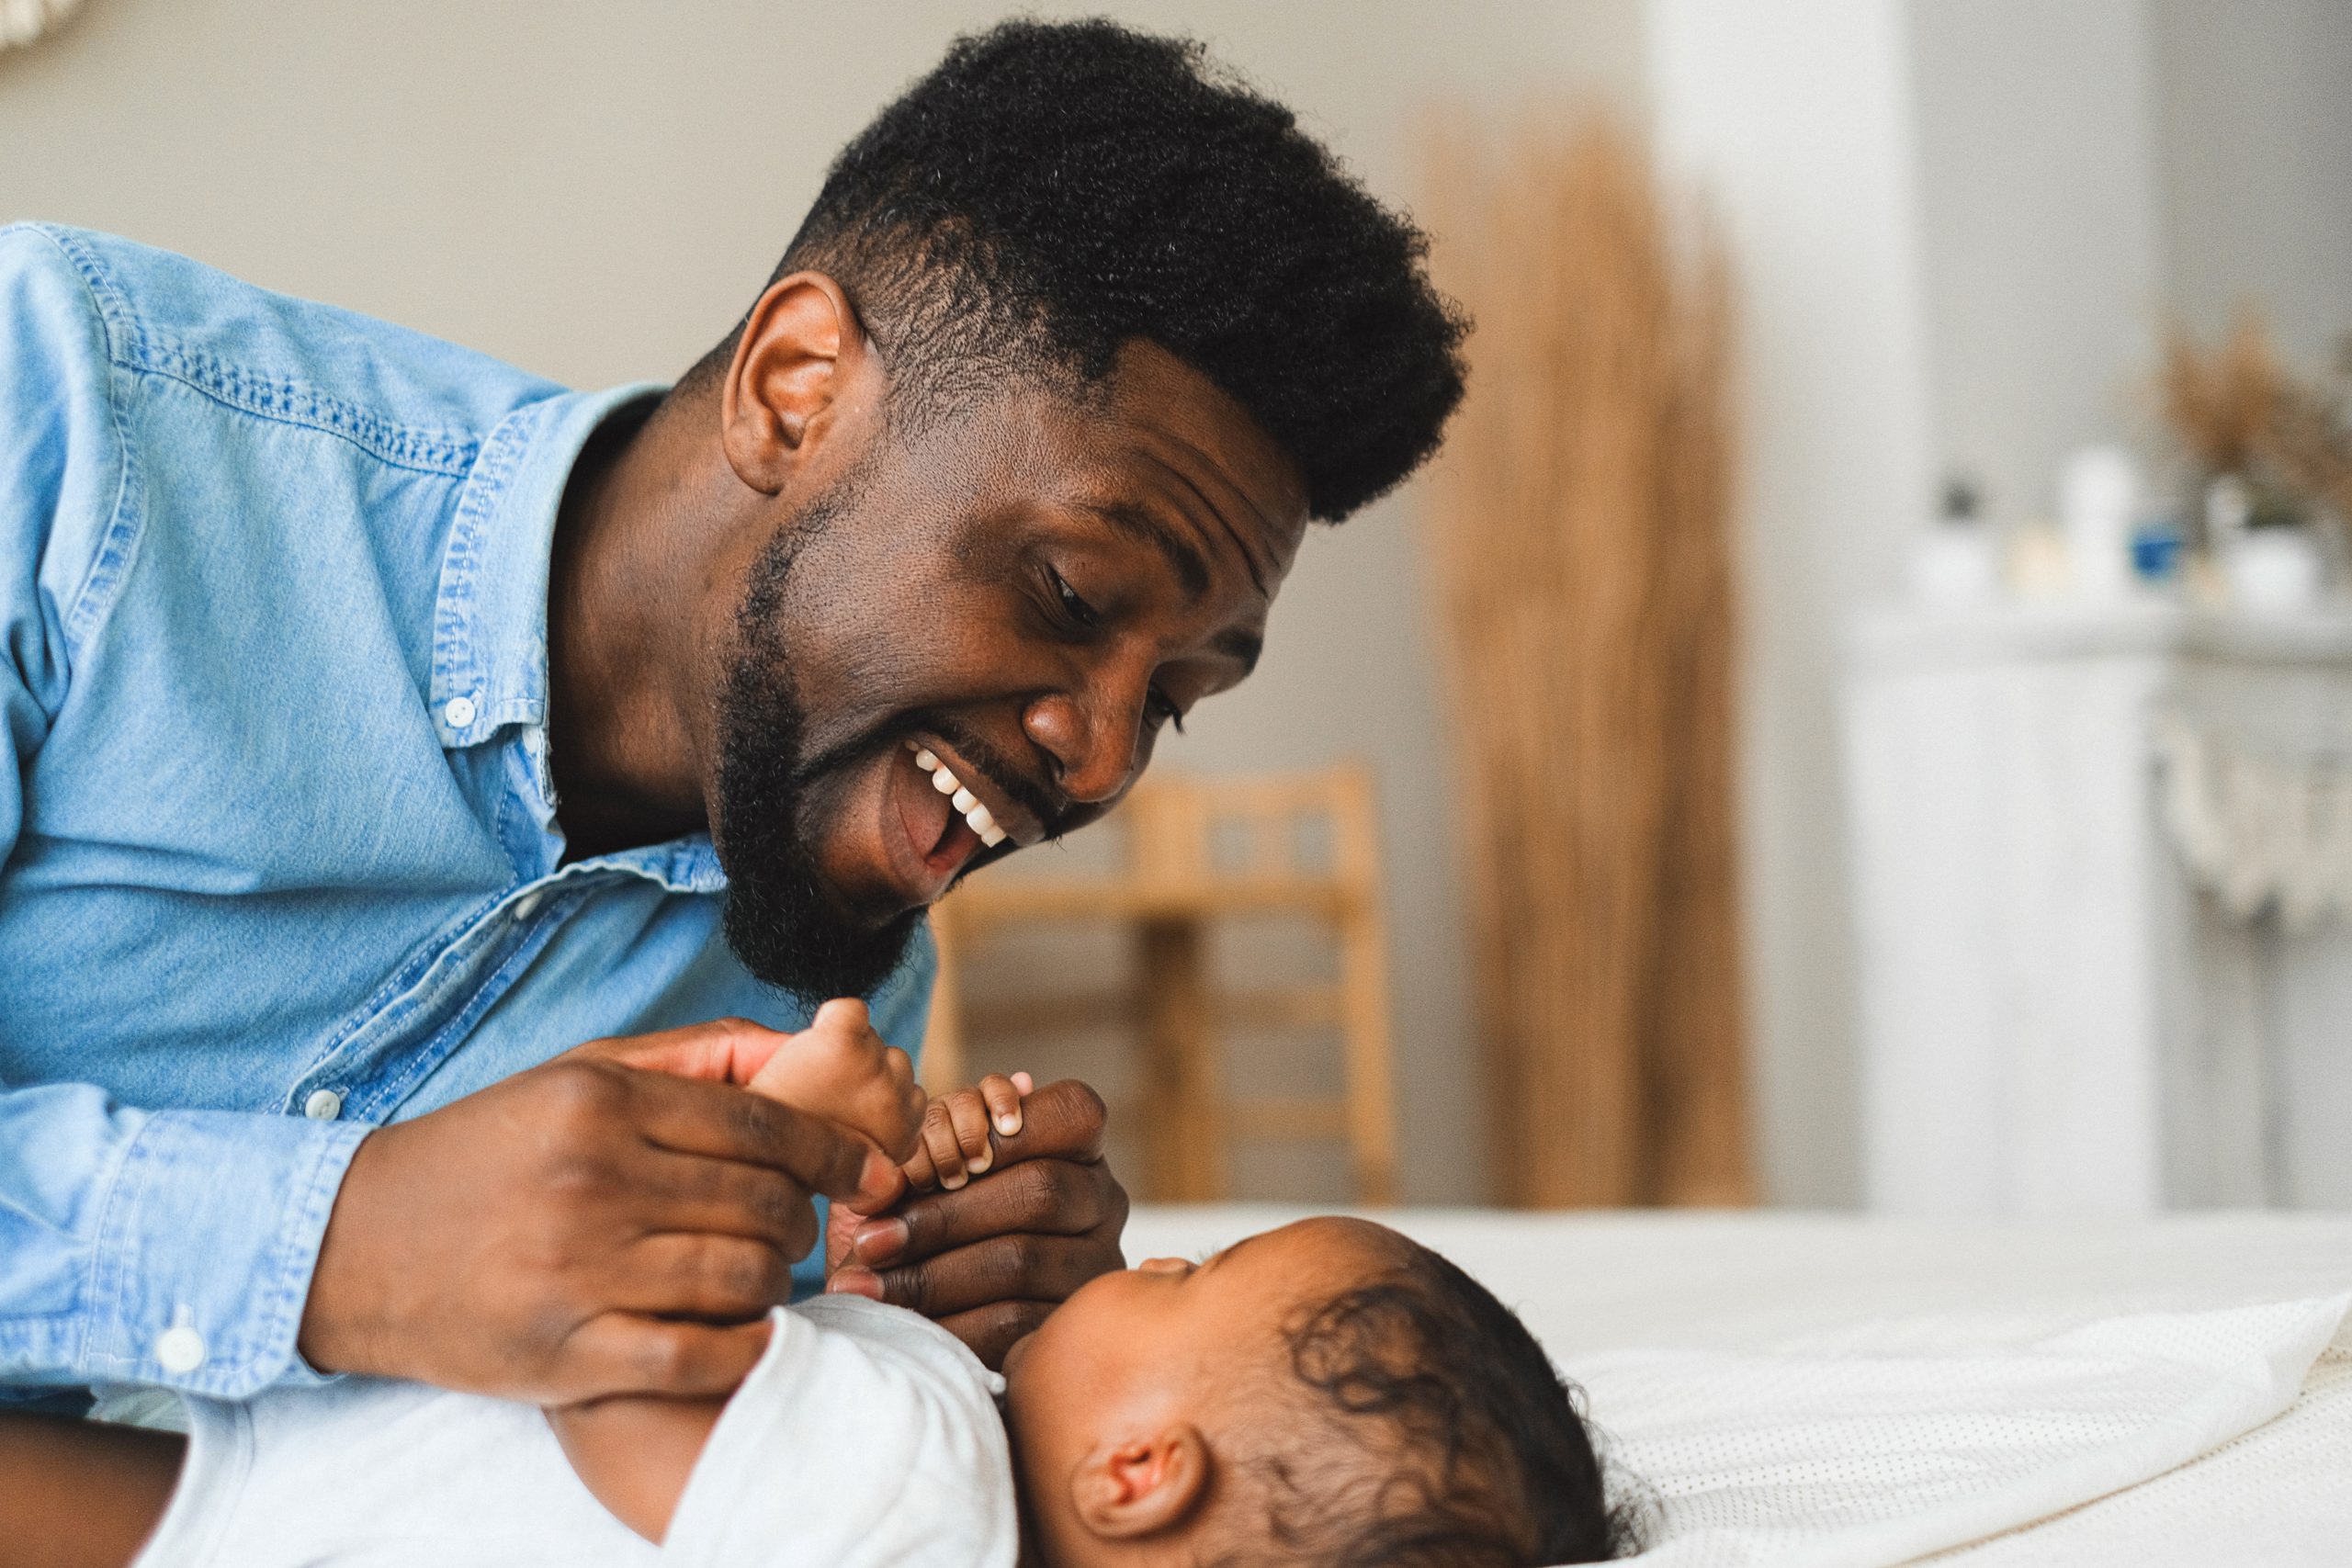 An african american dad holds his 6-month old's hands and sings a song while looking lovingly into his eyes.